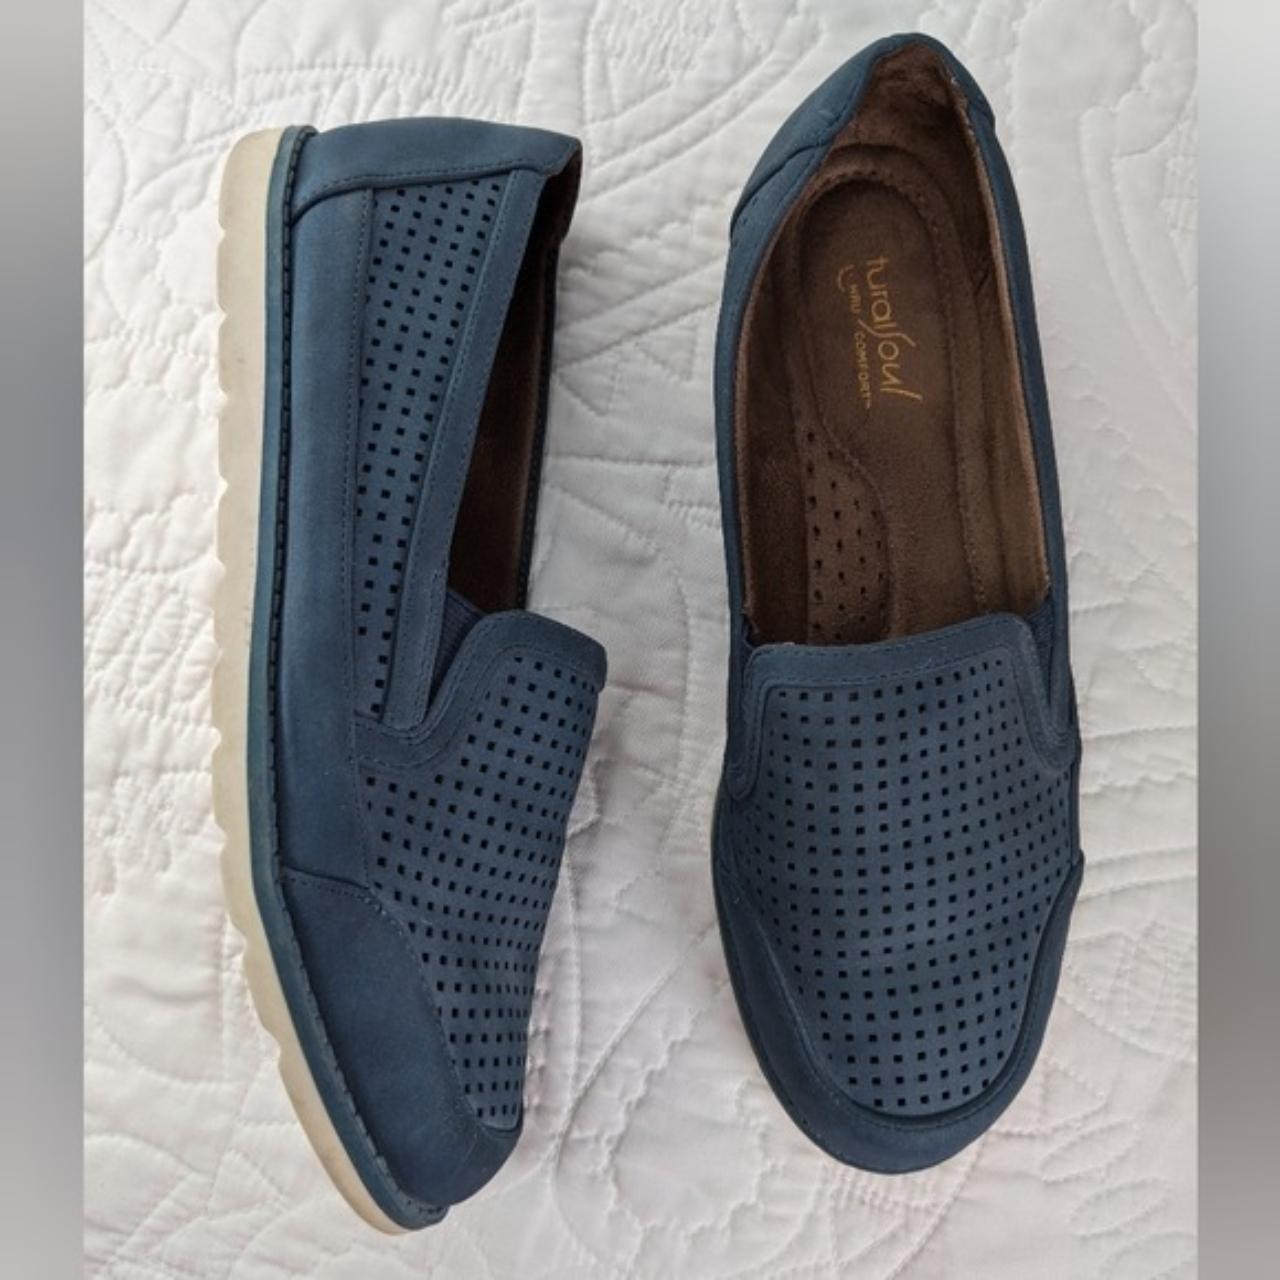  Natural Soul Shoes - Women's Loafers & Slip-Ons